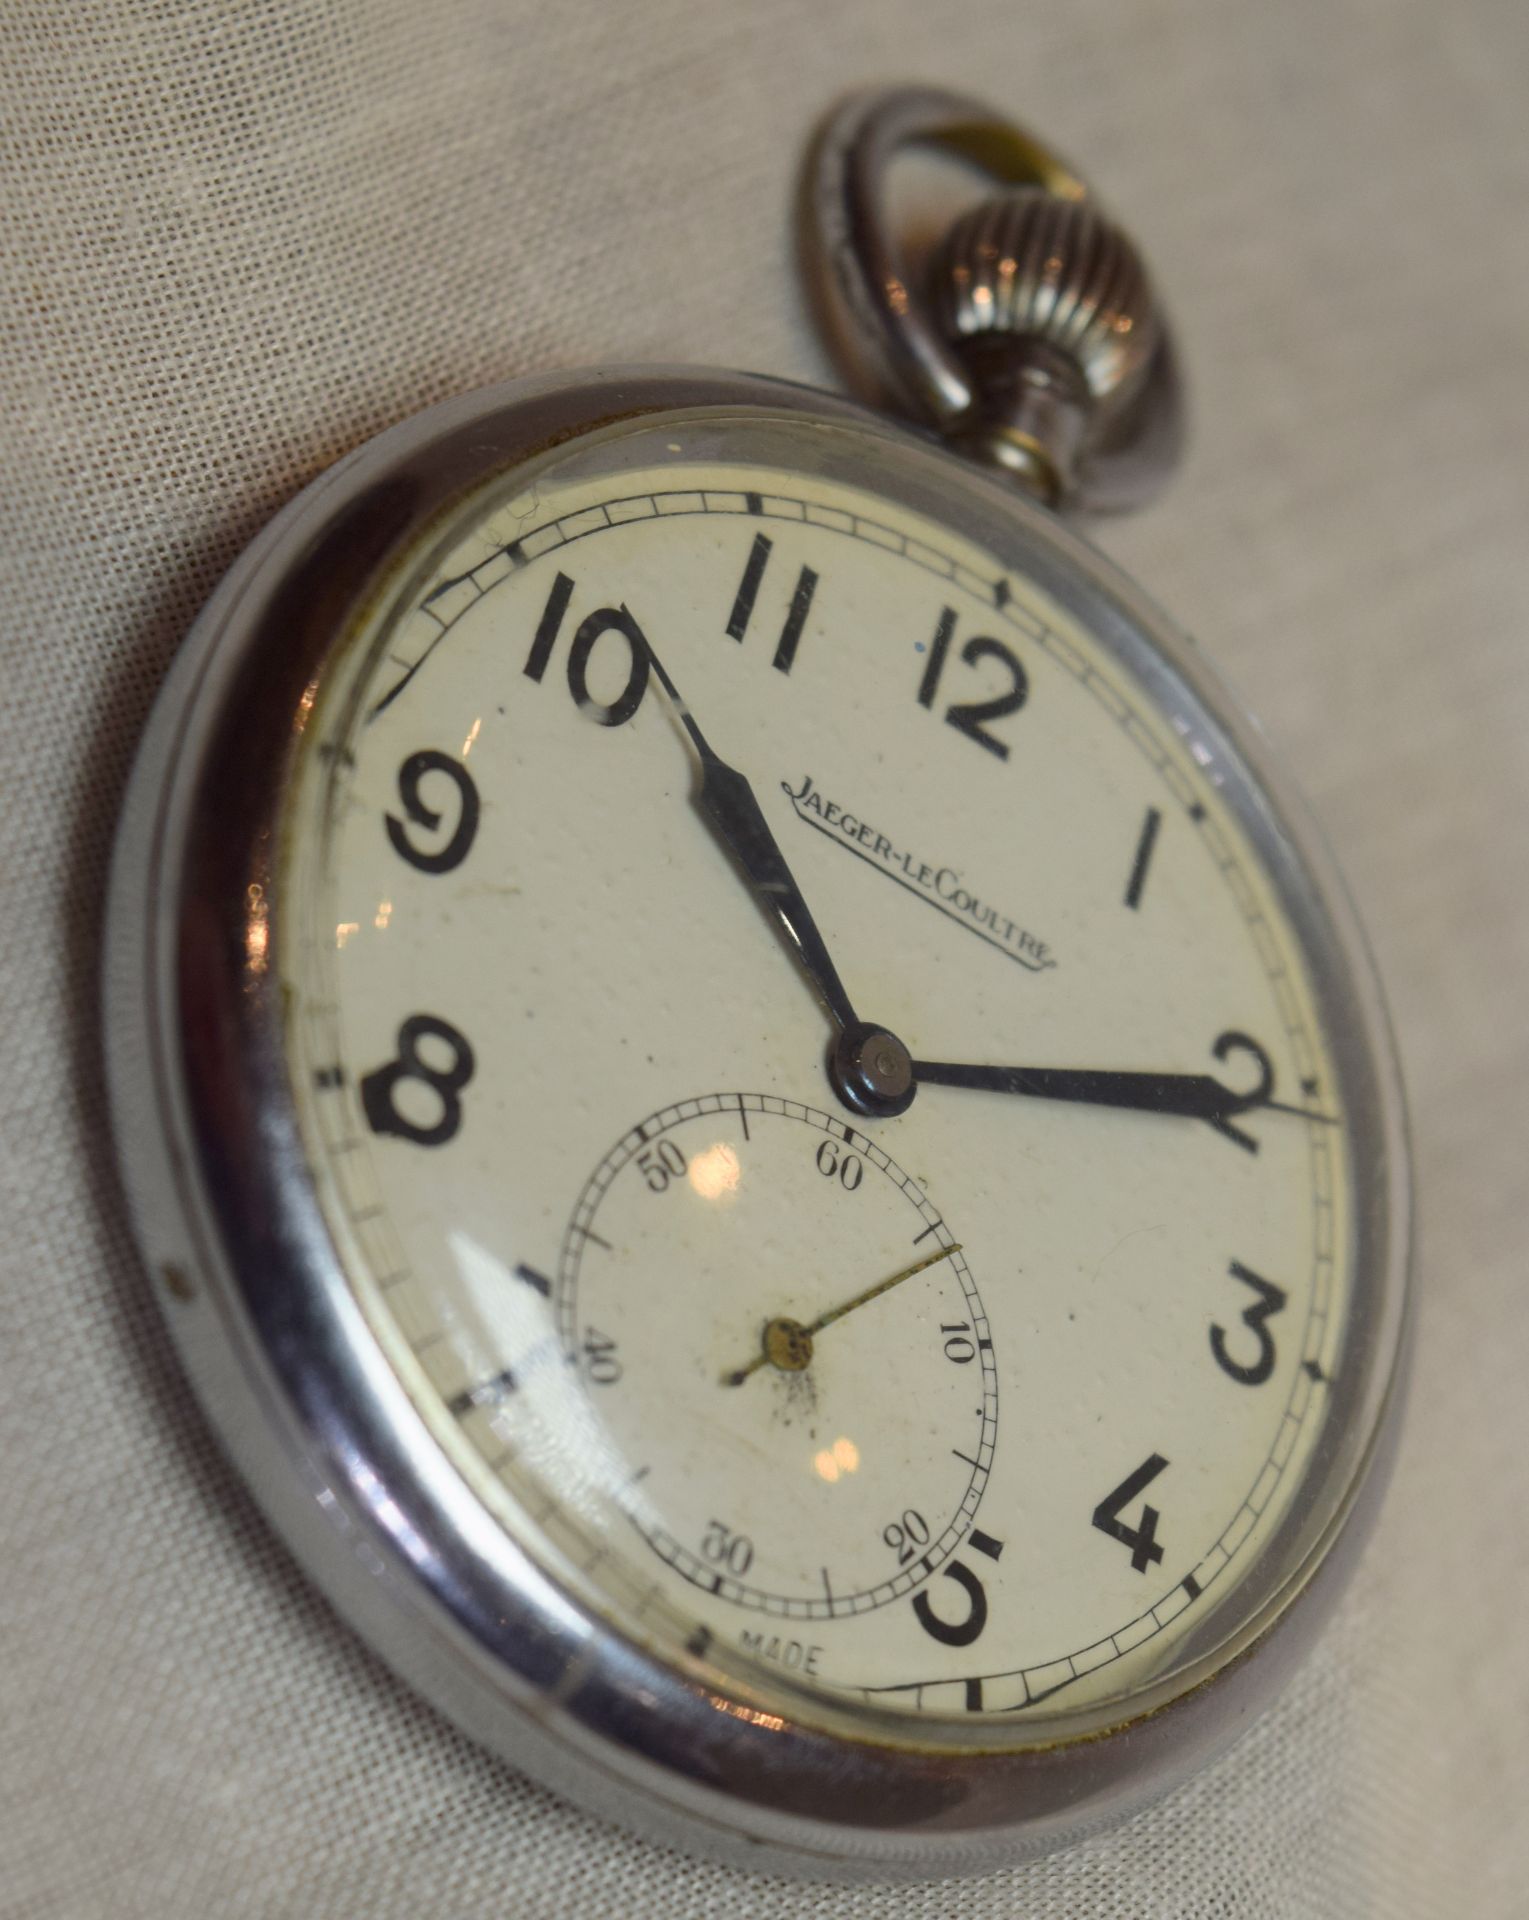 Jaeger LeCoultre WW2 Military Pocket Watch - Image 3 of 6